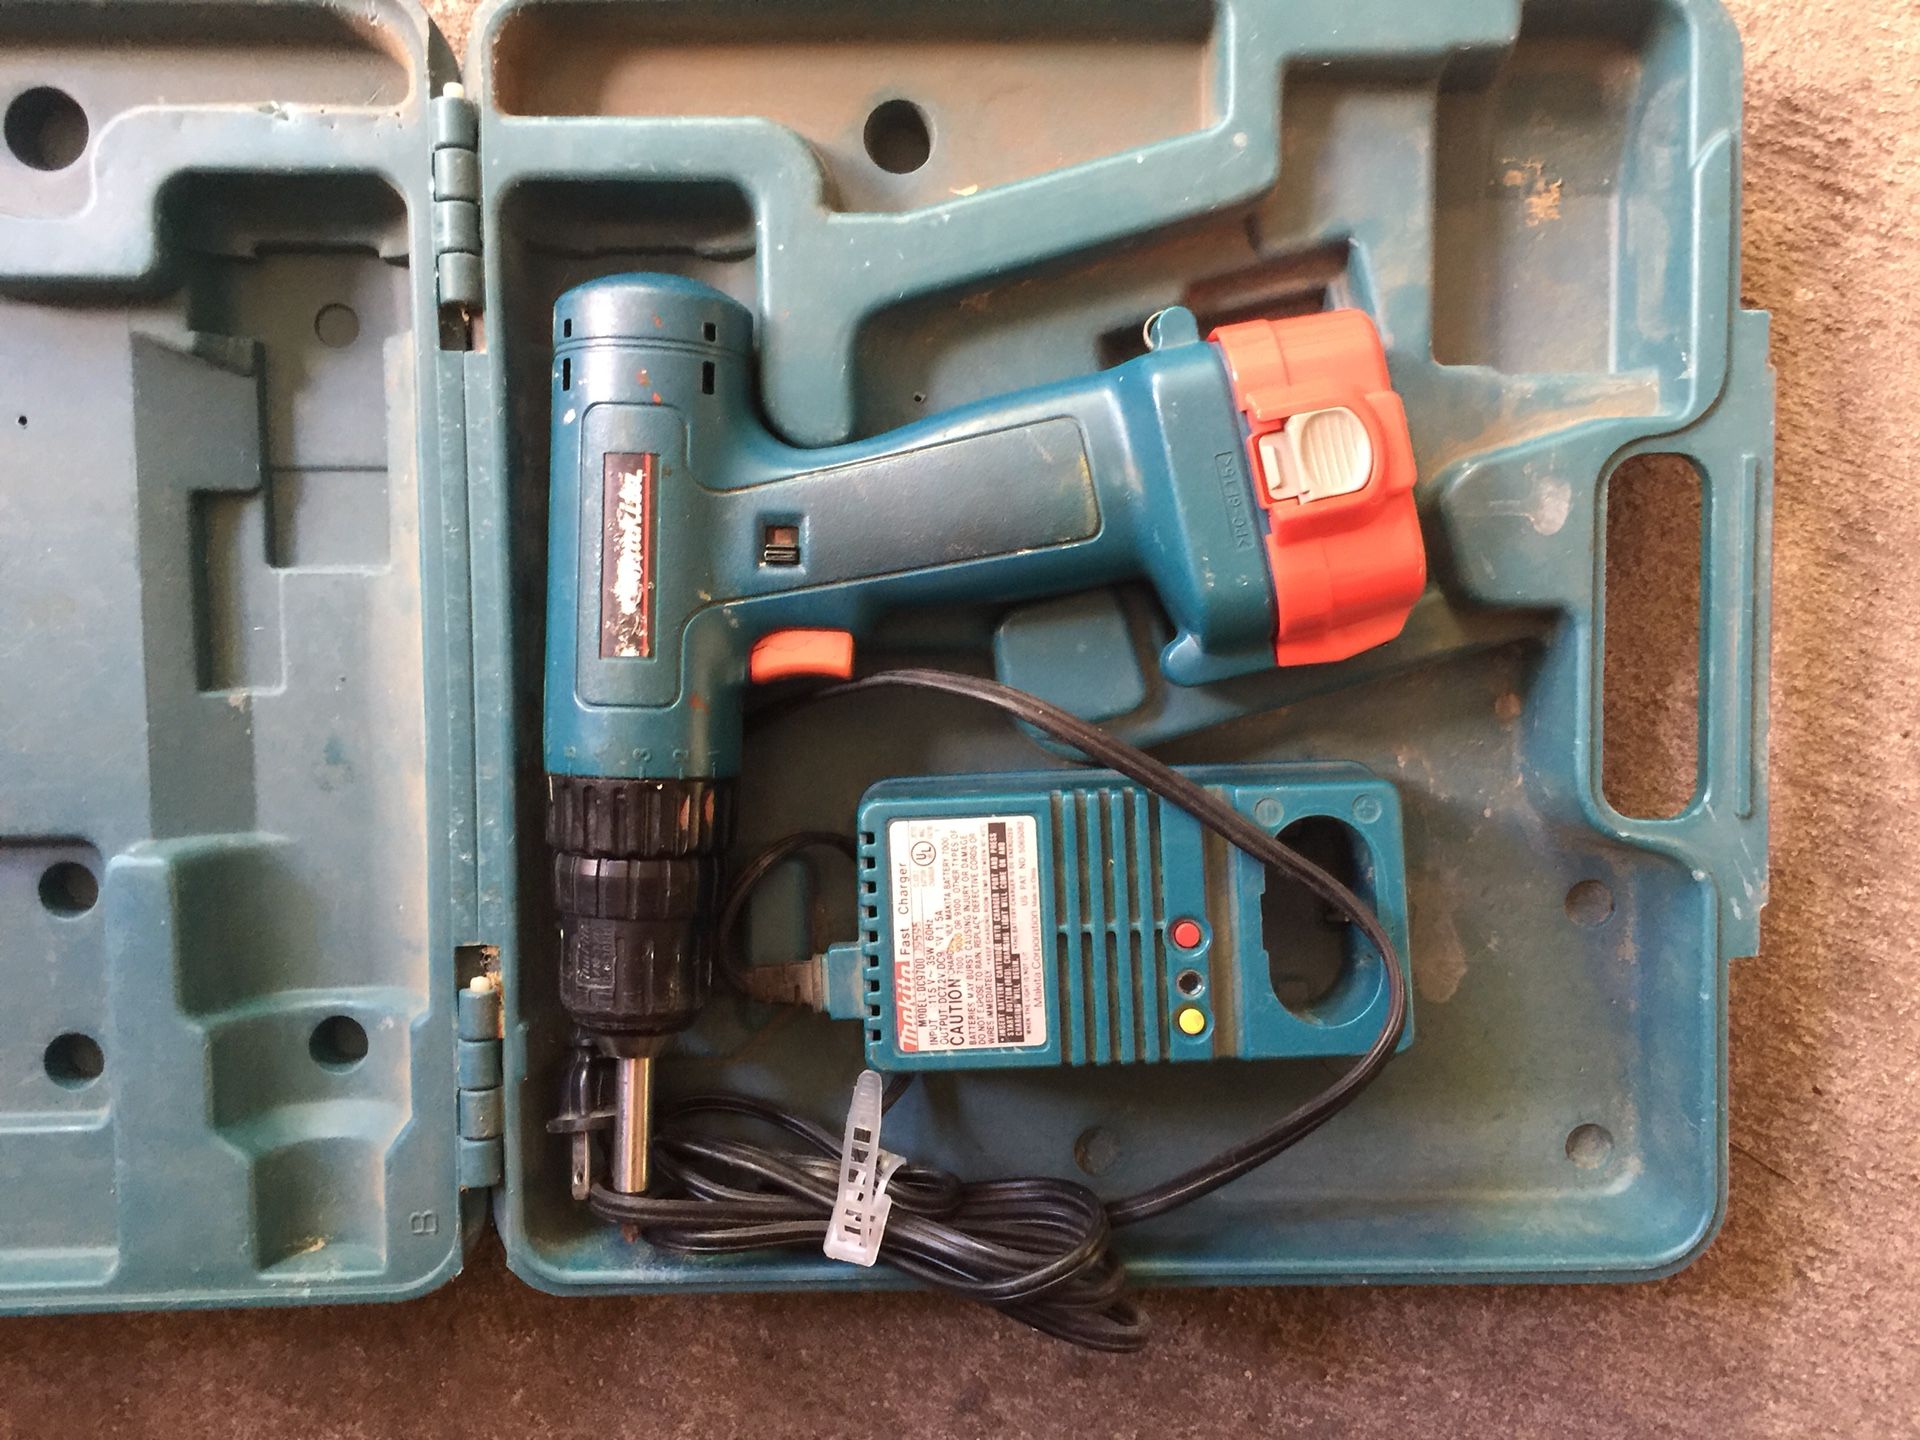 Majors drill with charger and battery works great has bit and case